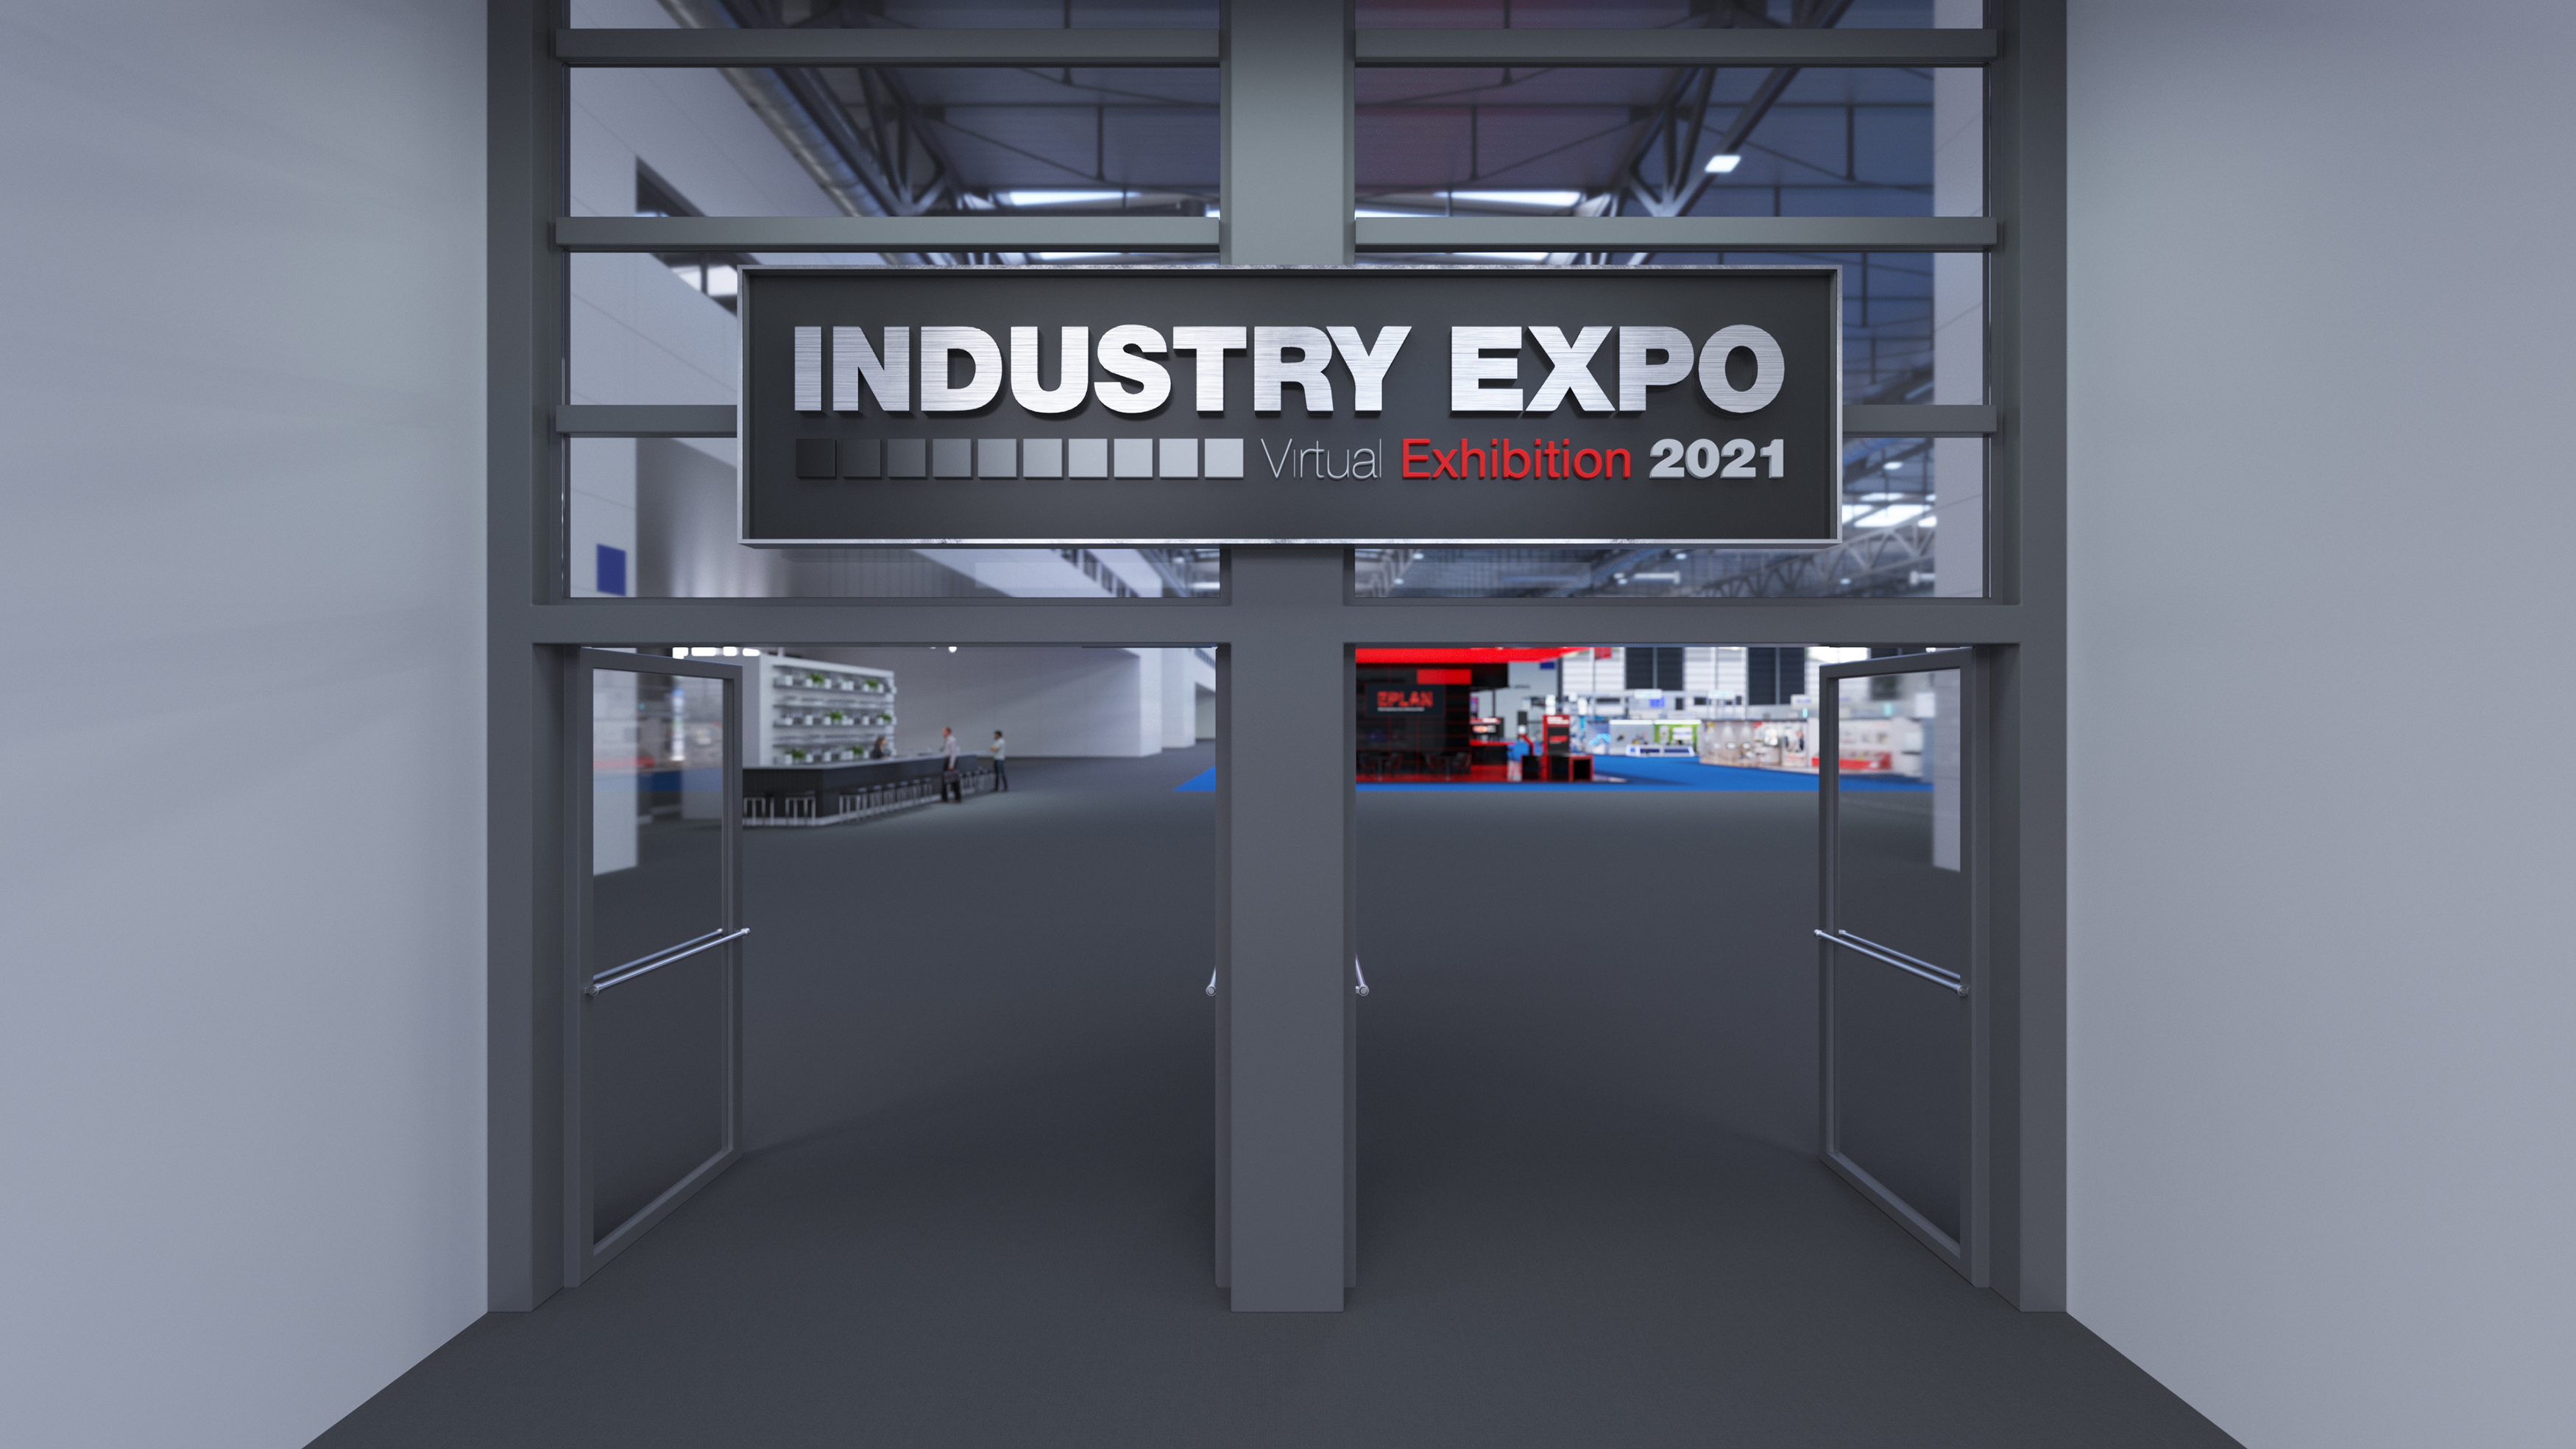 IndustryExpo ’21 opened its doors officially on 22nd January 2021 with a host of new stands and features including Super-HD navigation.